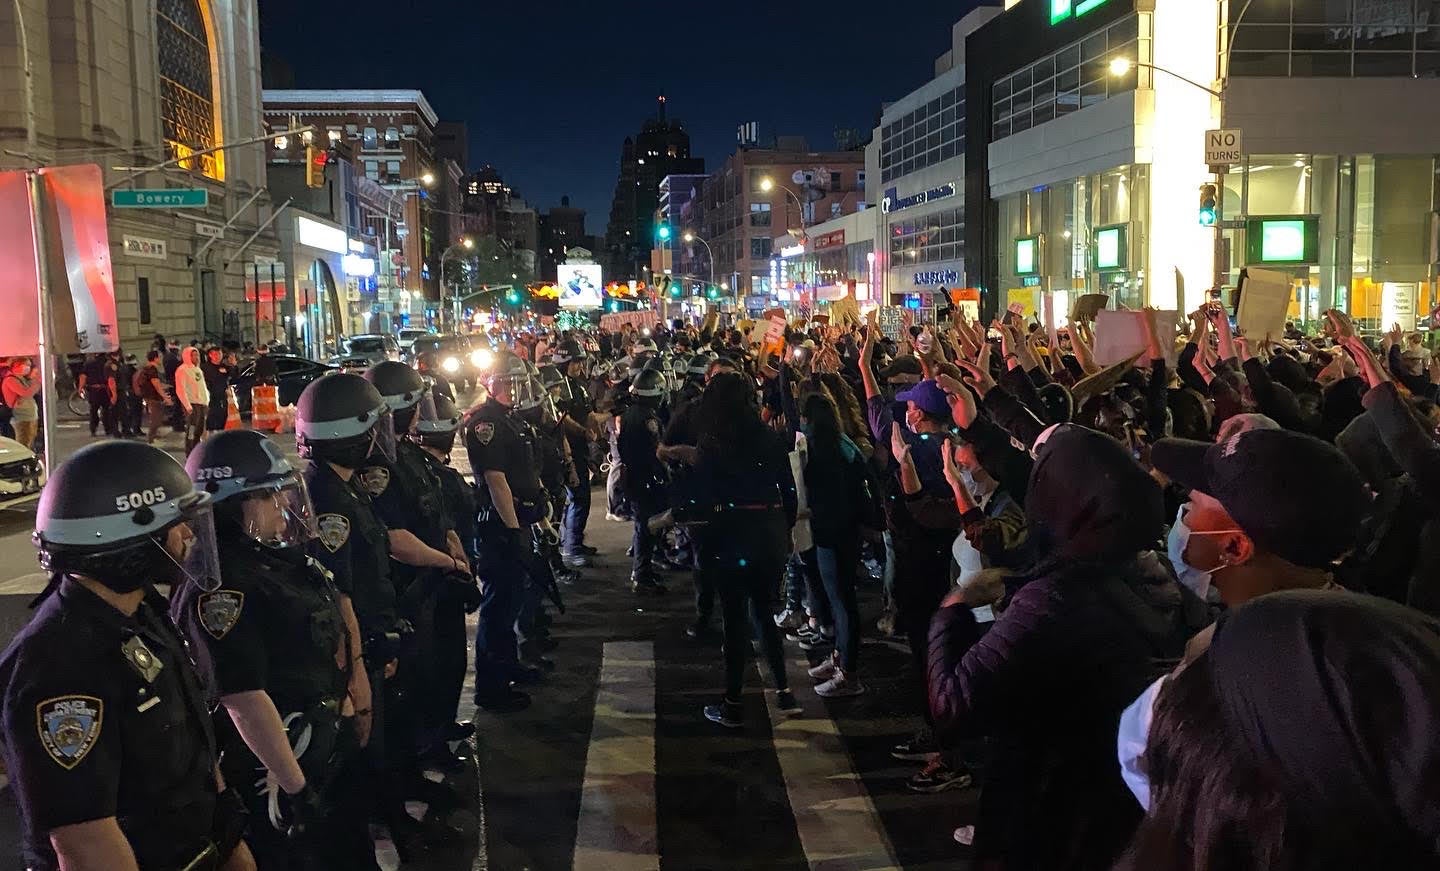 Protesters from the Black Lives Matter movement face-off against police in Manhattan on 31 May, 2020. (Richard Hall / The Independent )